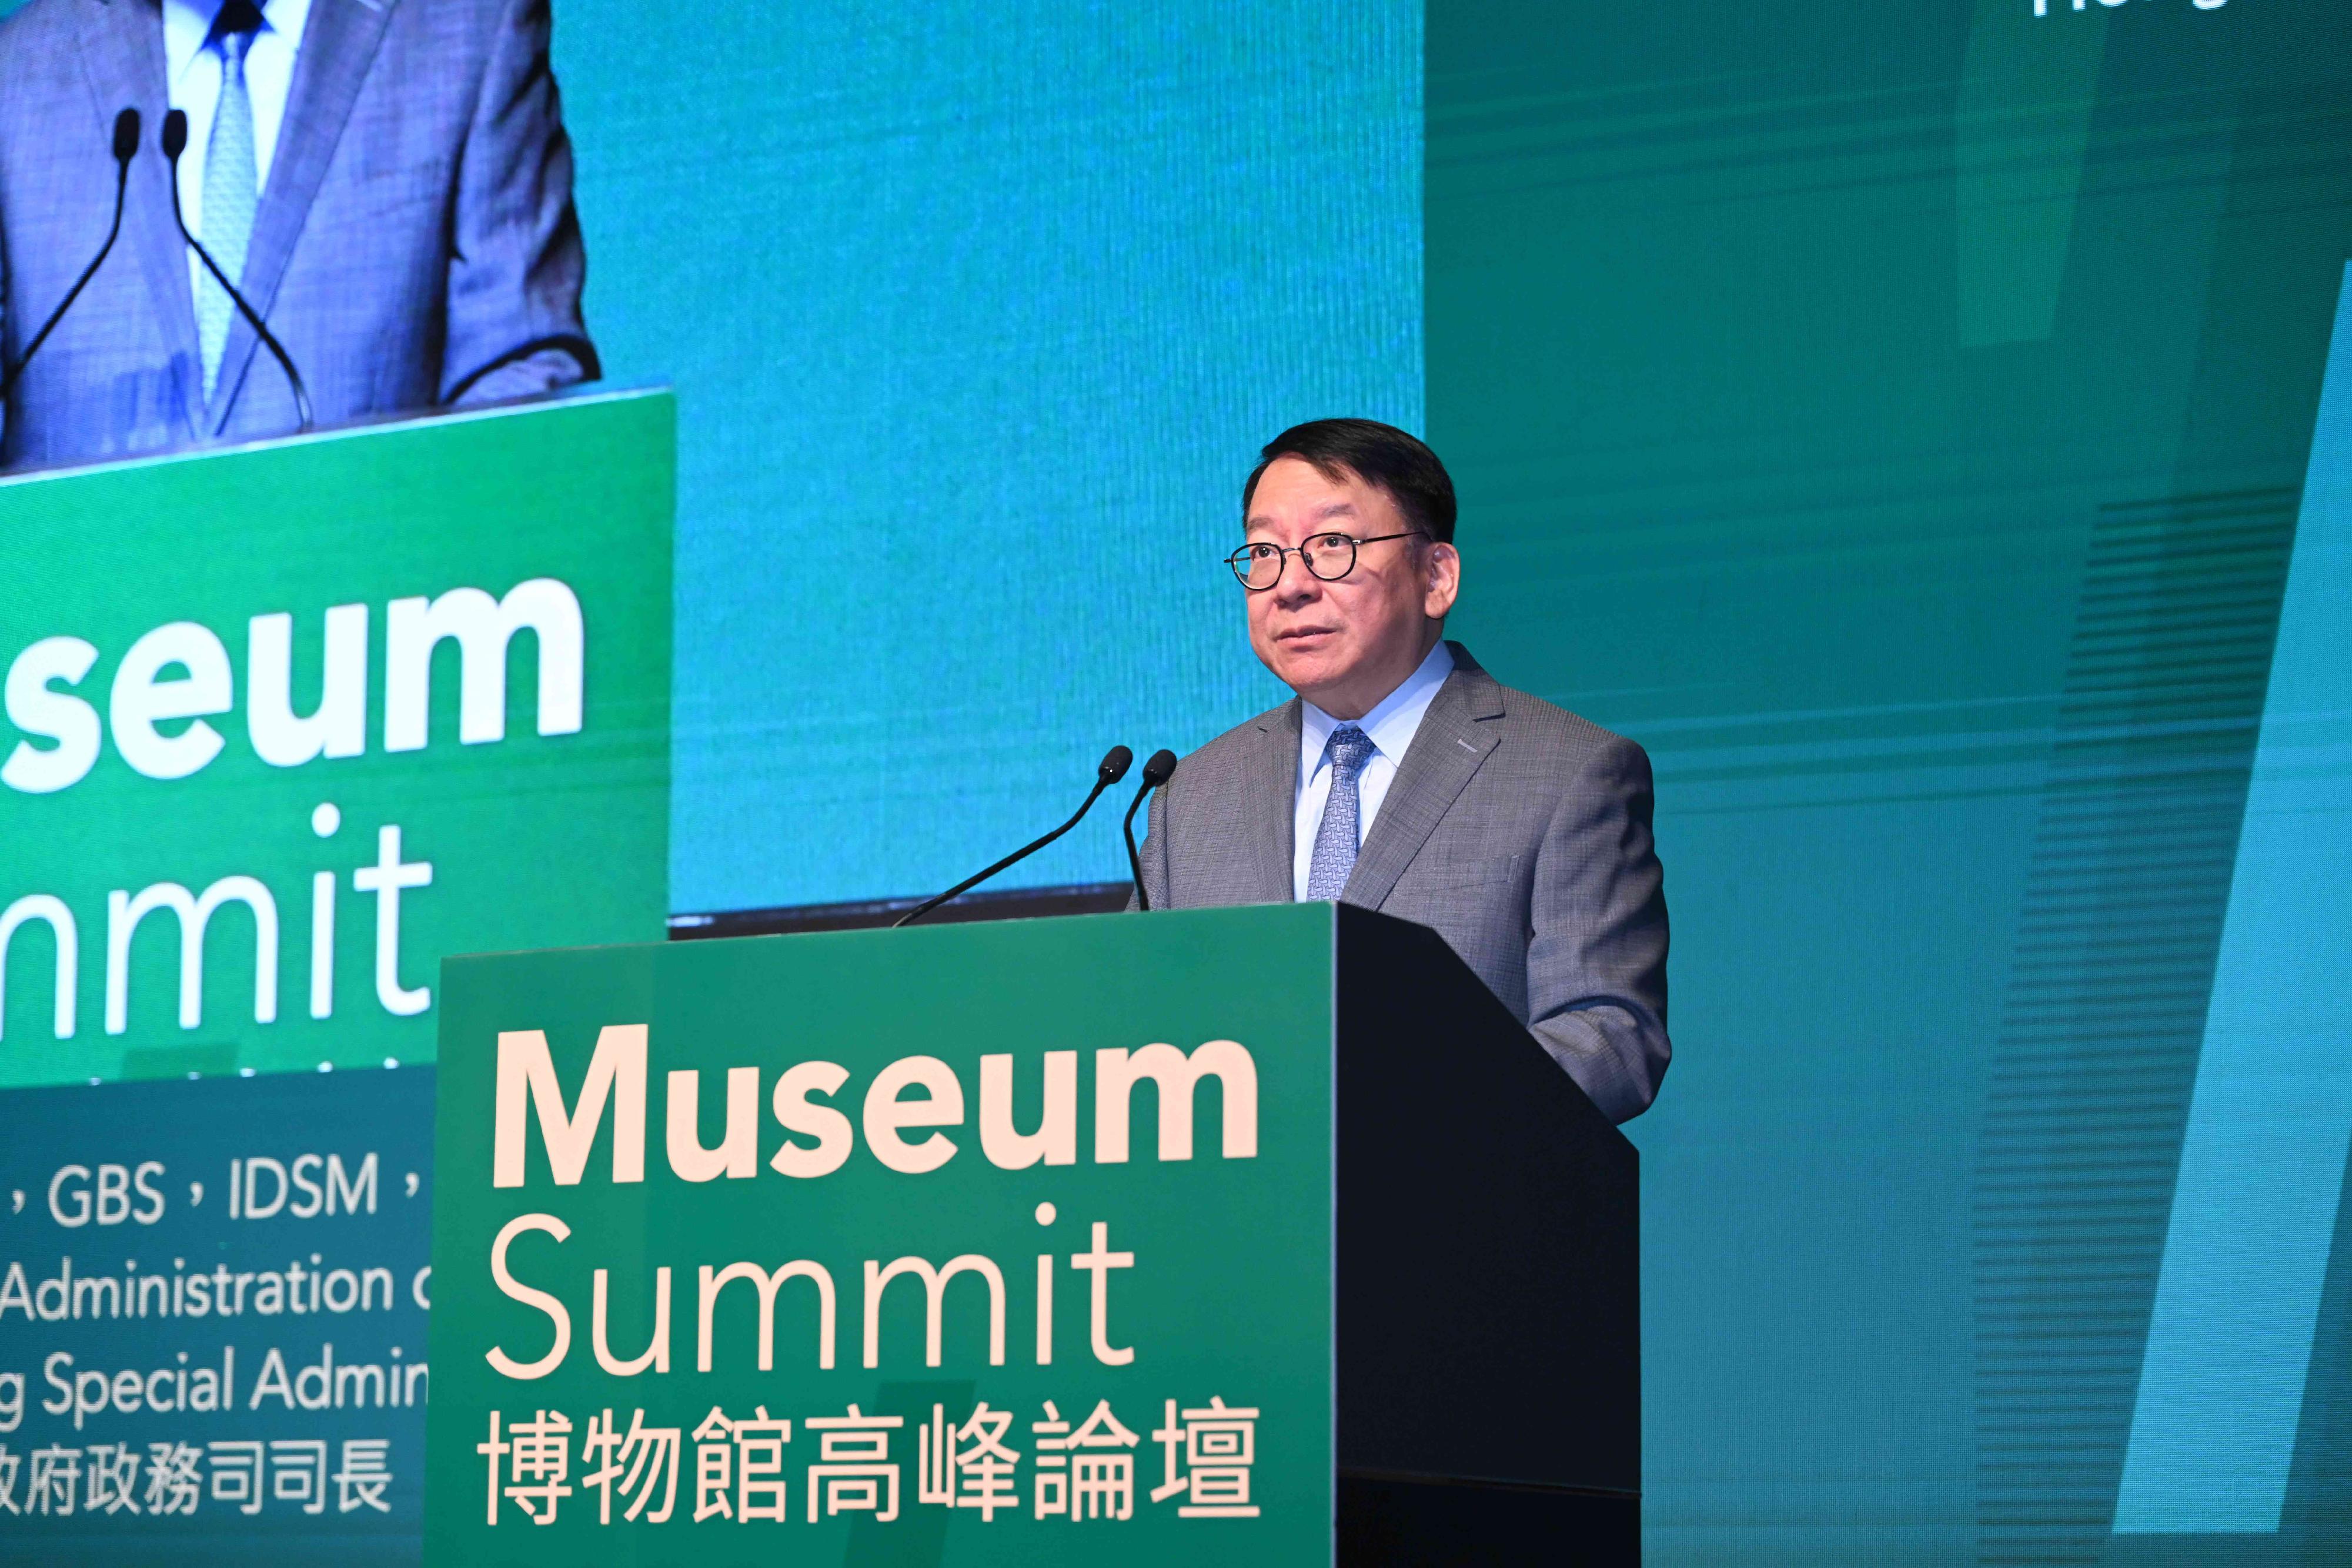 The Chief Secretary for Administration, Mr Chan Kwok-ki, speaks at the opening ceremony of the Museum Summit 2023 today (March 24).